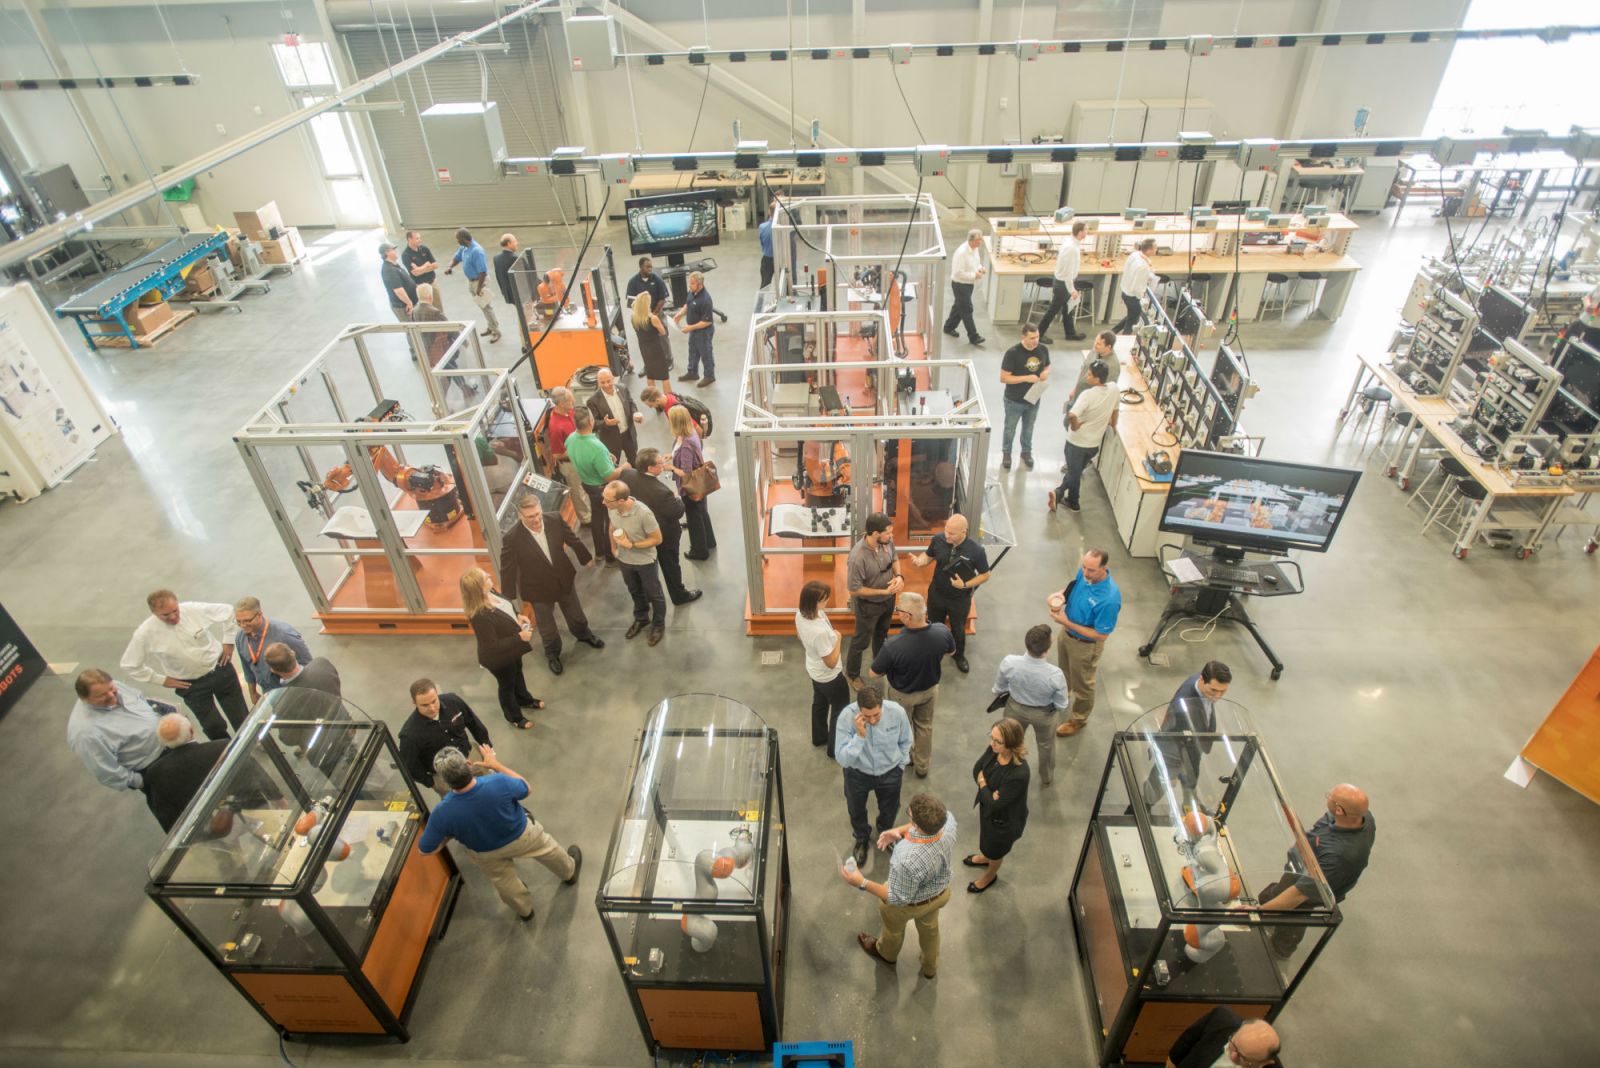 Kuka robots are now in place on the mechatronics shop floor at Greenville Technical College's Center for Manufacturing Innovation. (Photo/Provided)